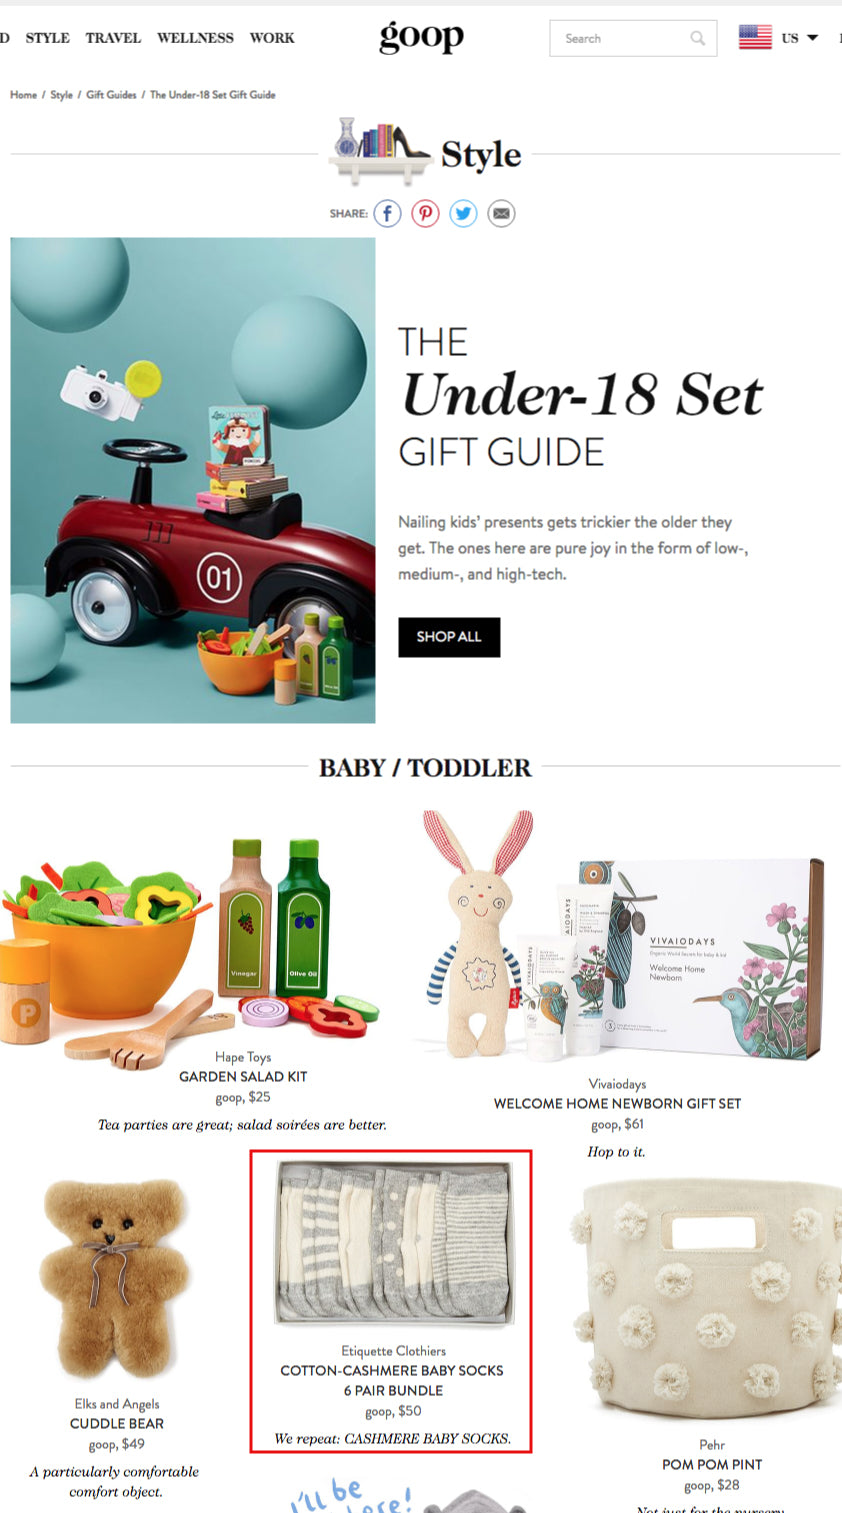 Goop: The Under-18 Set Holiday Gift Guide